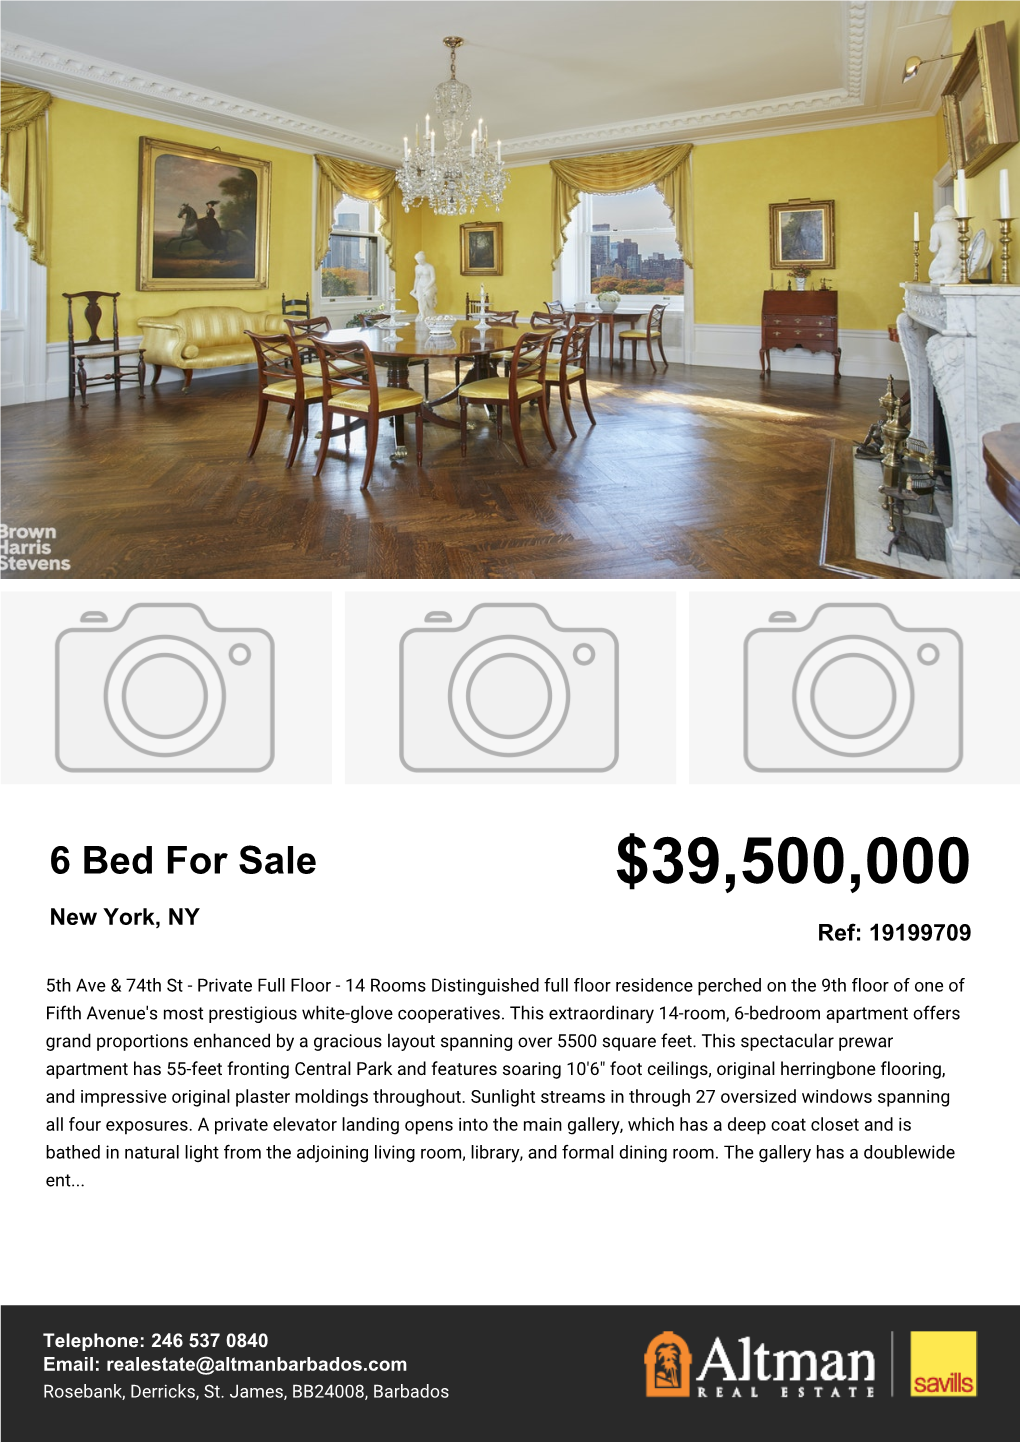 6 Bed for Sale $39,500,000 New York, NY Ref: 19199709